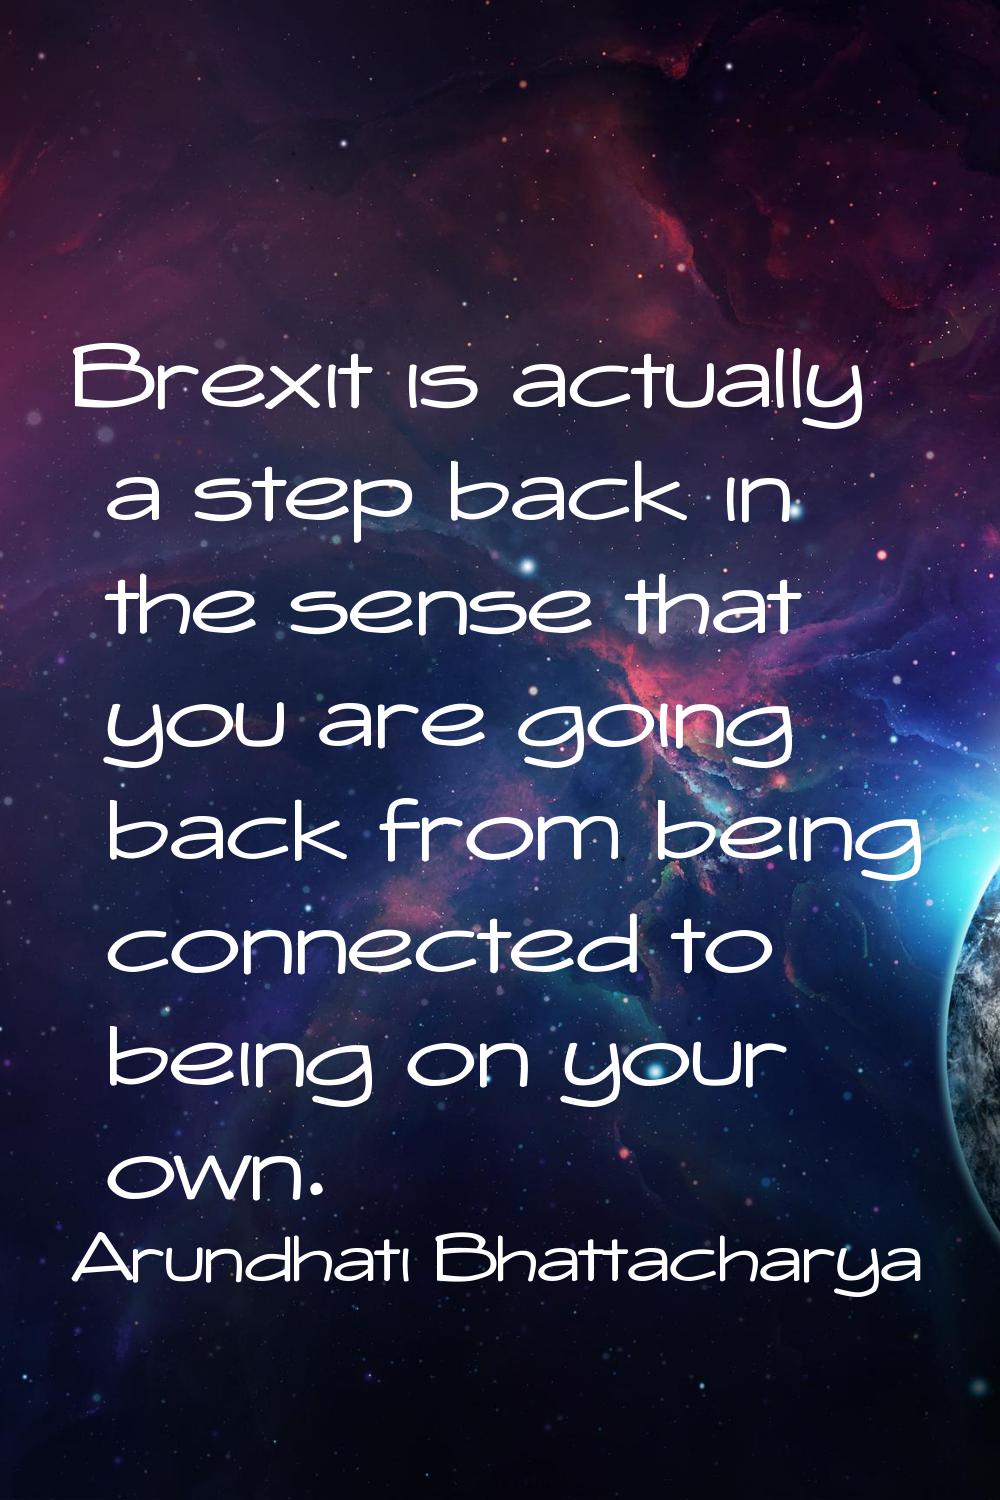 Brexit is actually a step back in the sense that you are going back from being connected to being o